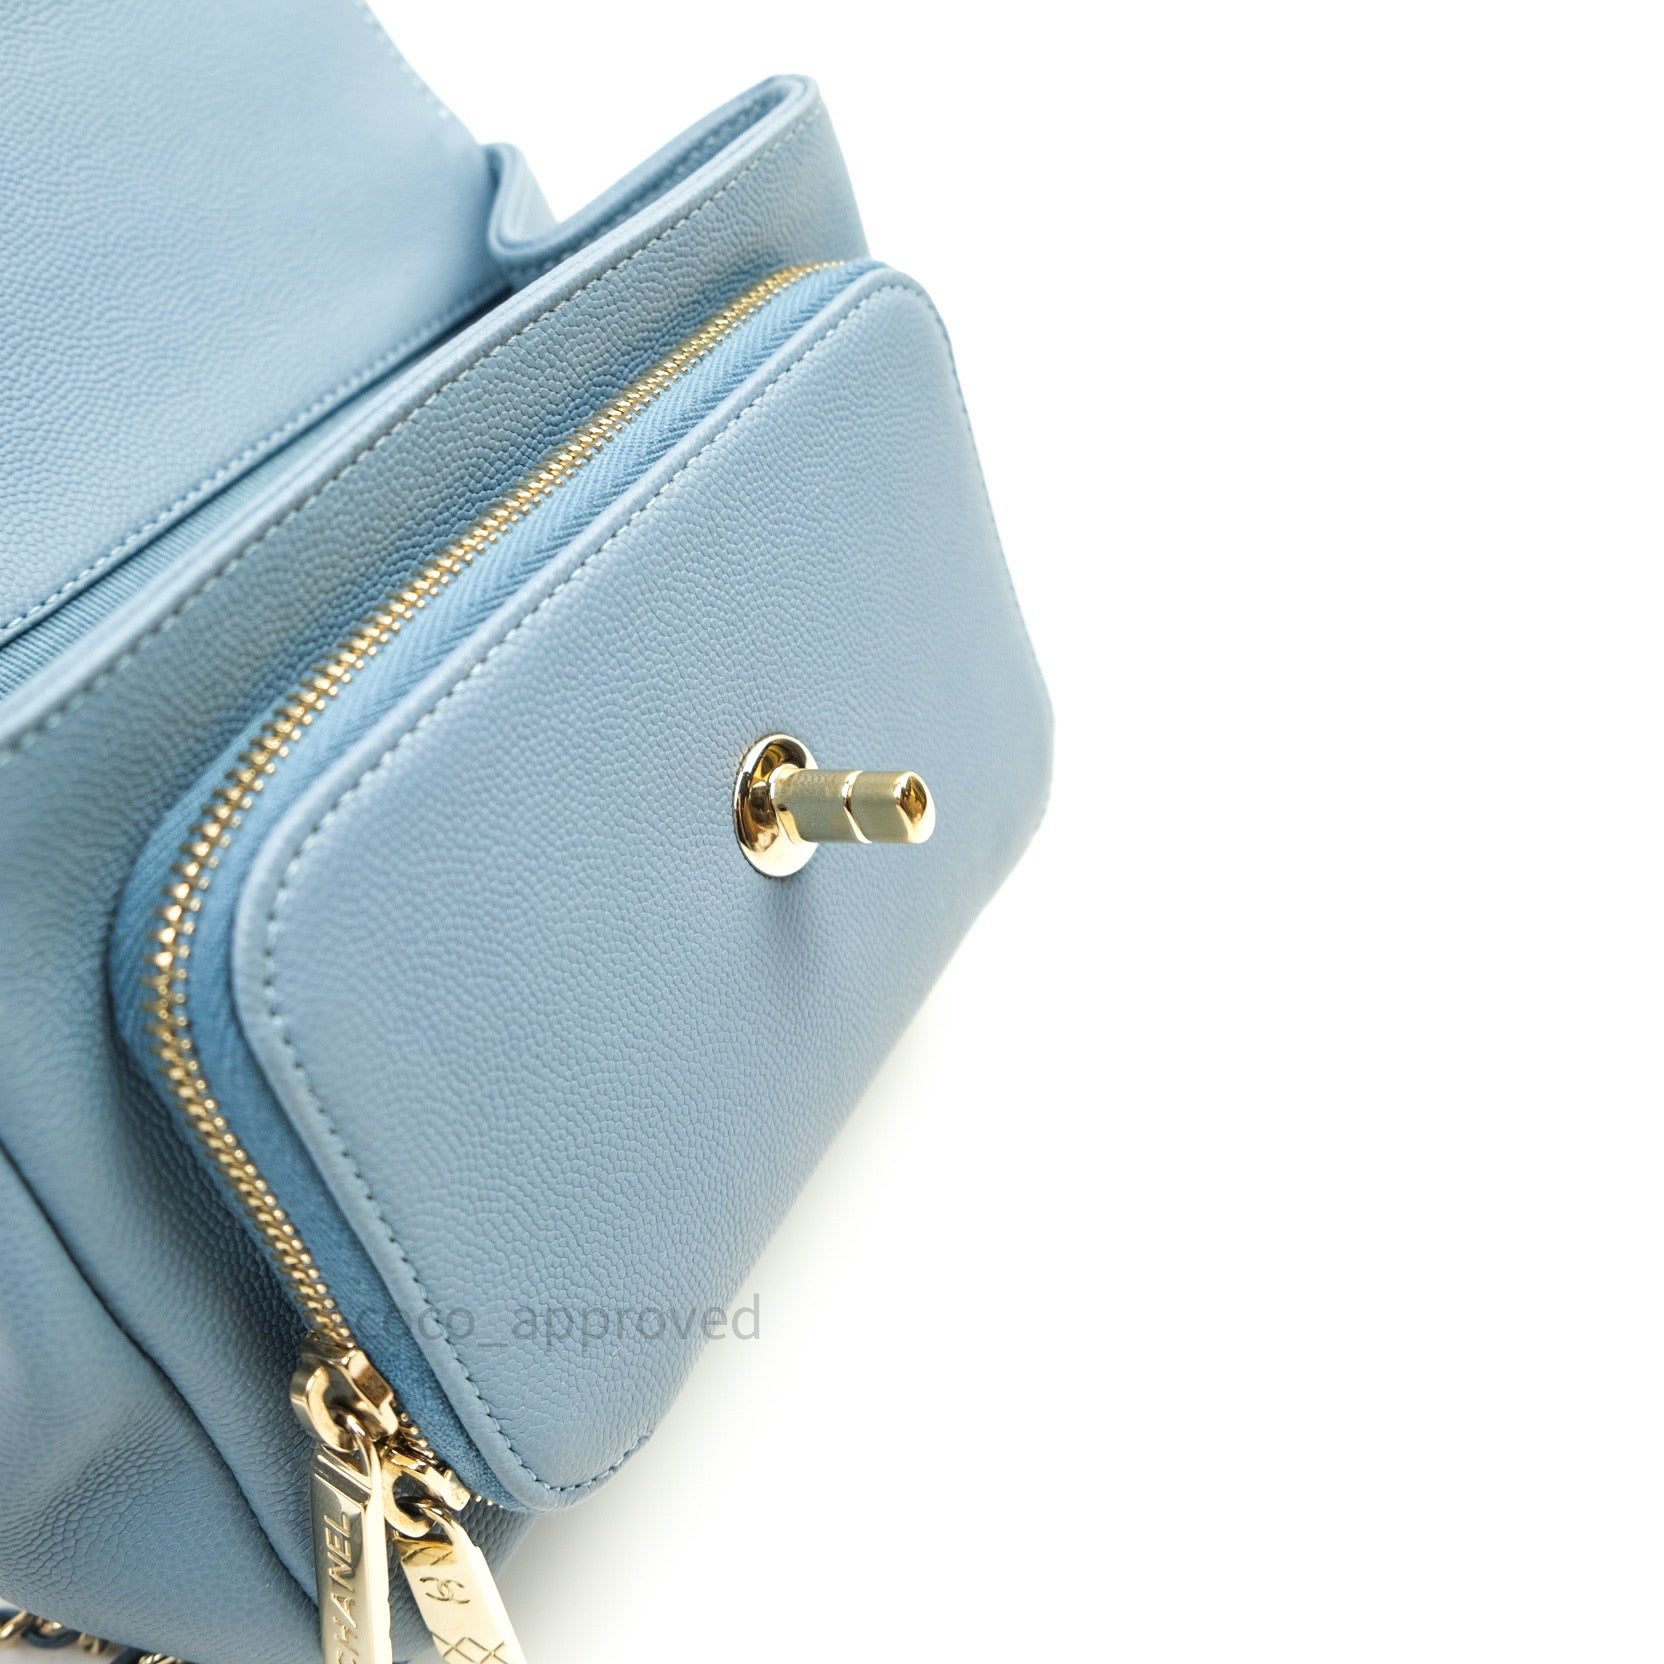 Chanel Business Affinity 2WAYFlap Bag Size Small Light Blue A93749 Caviar Leather